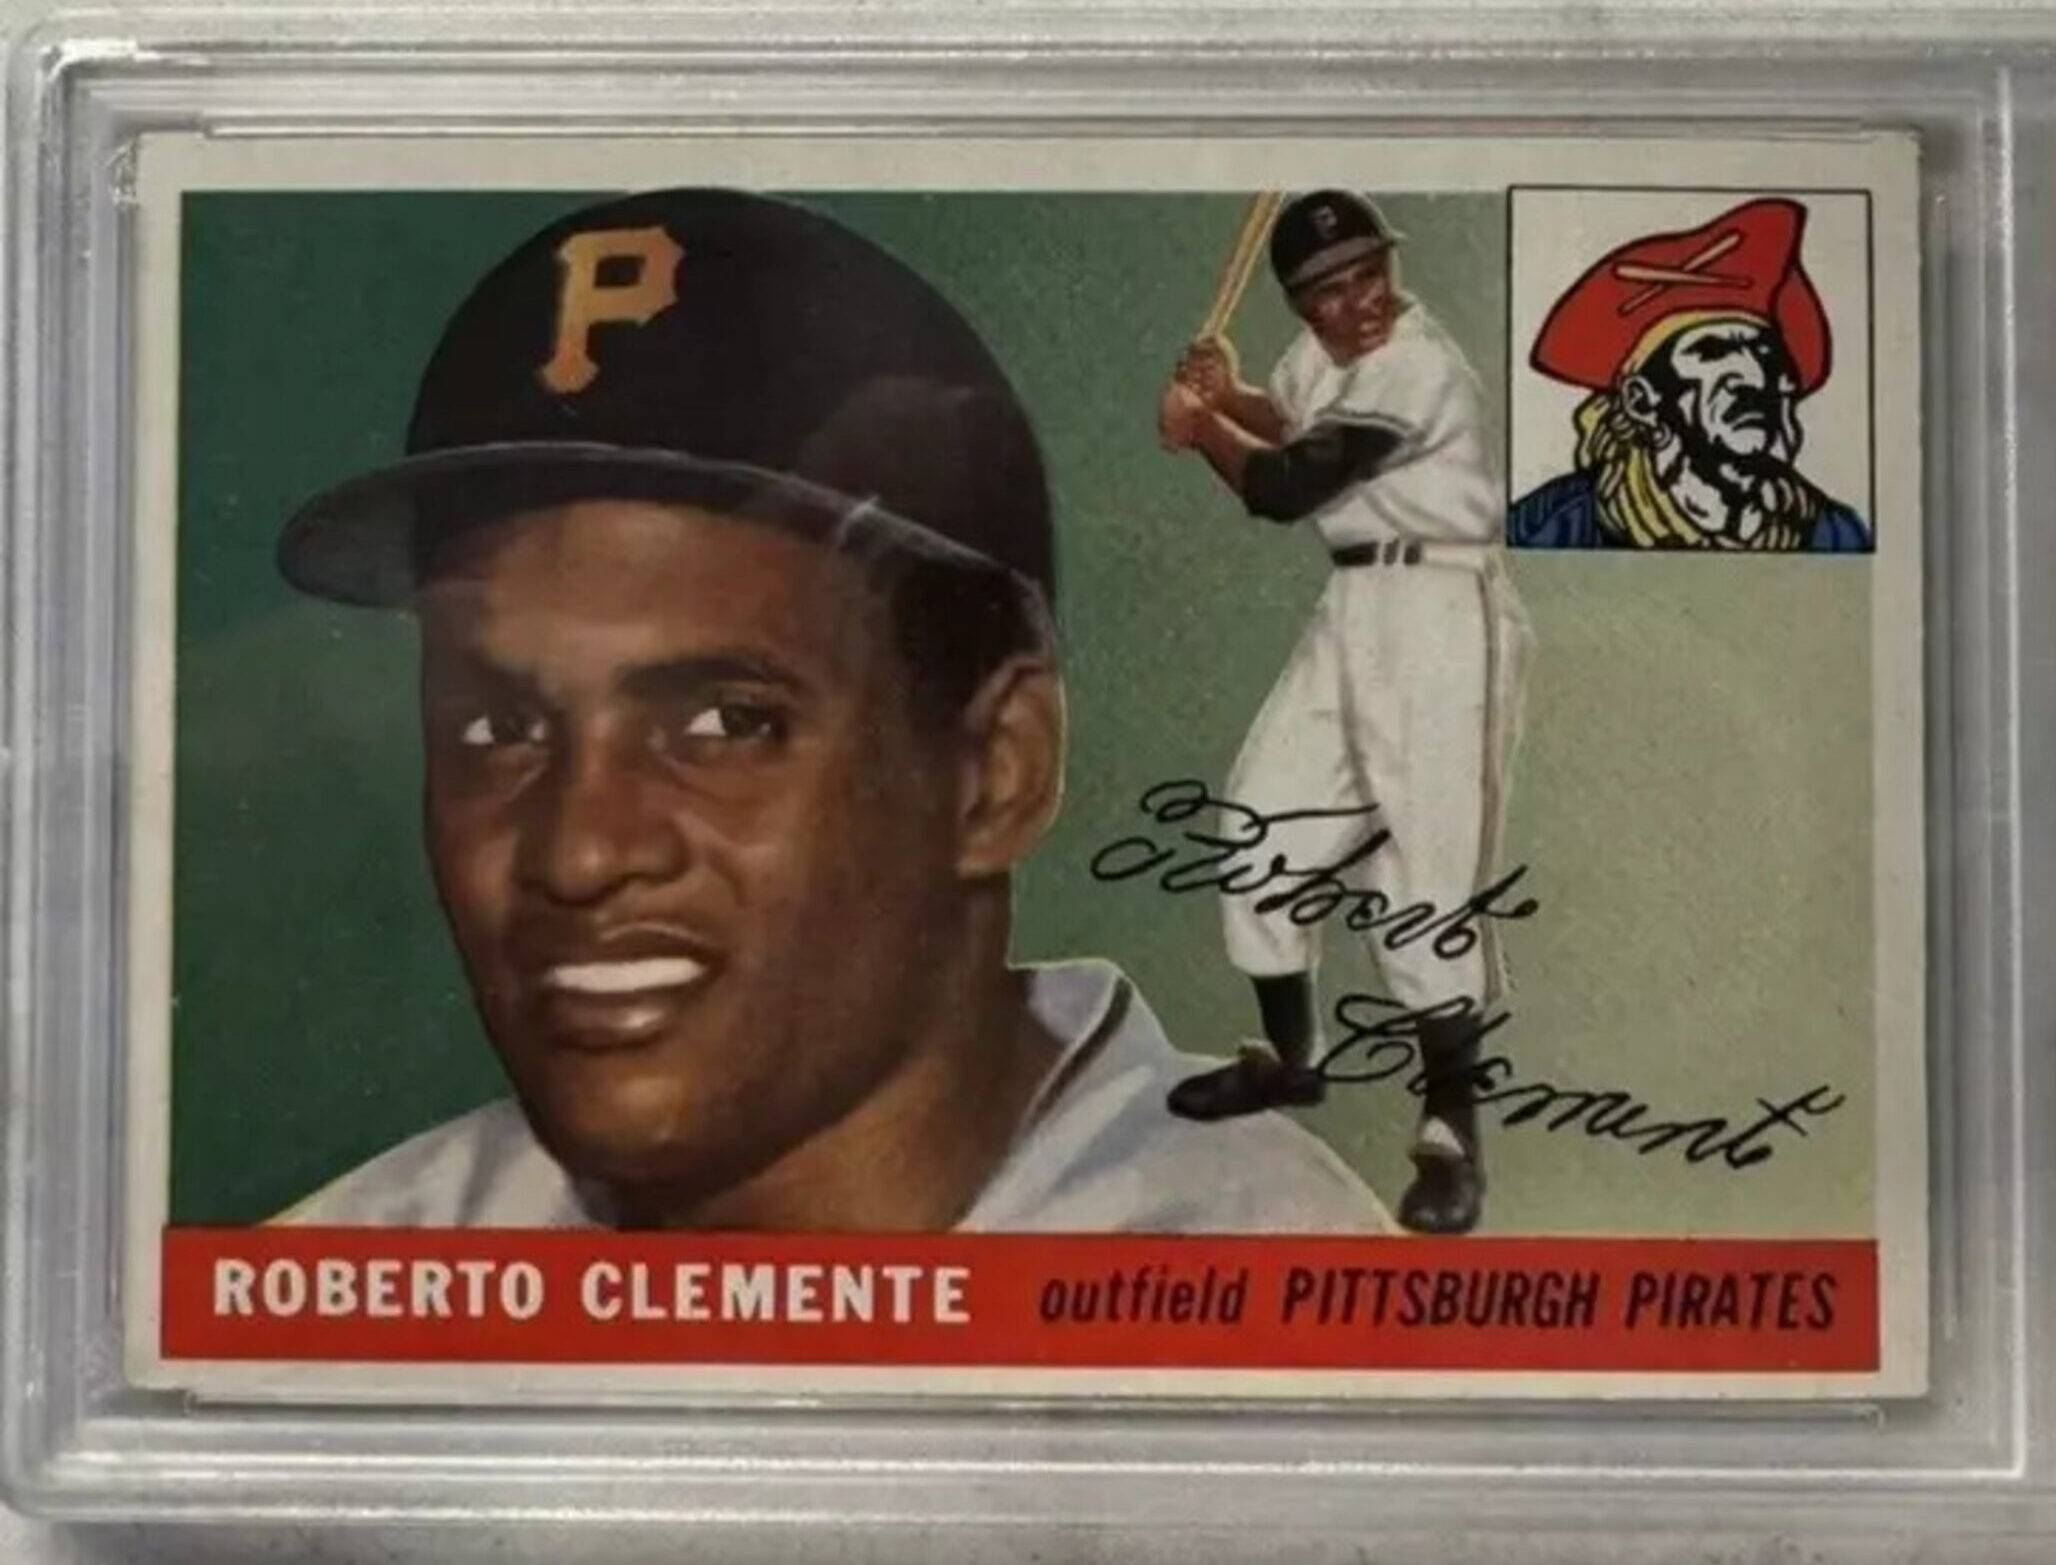 1955 Topps Roberto Clemente rookie card